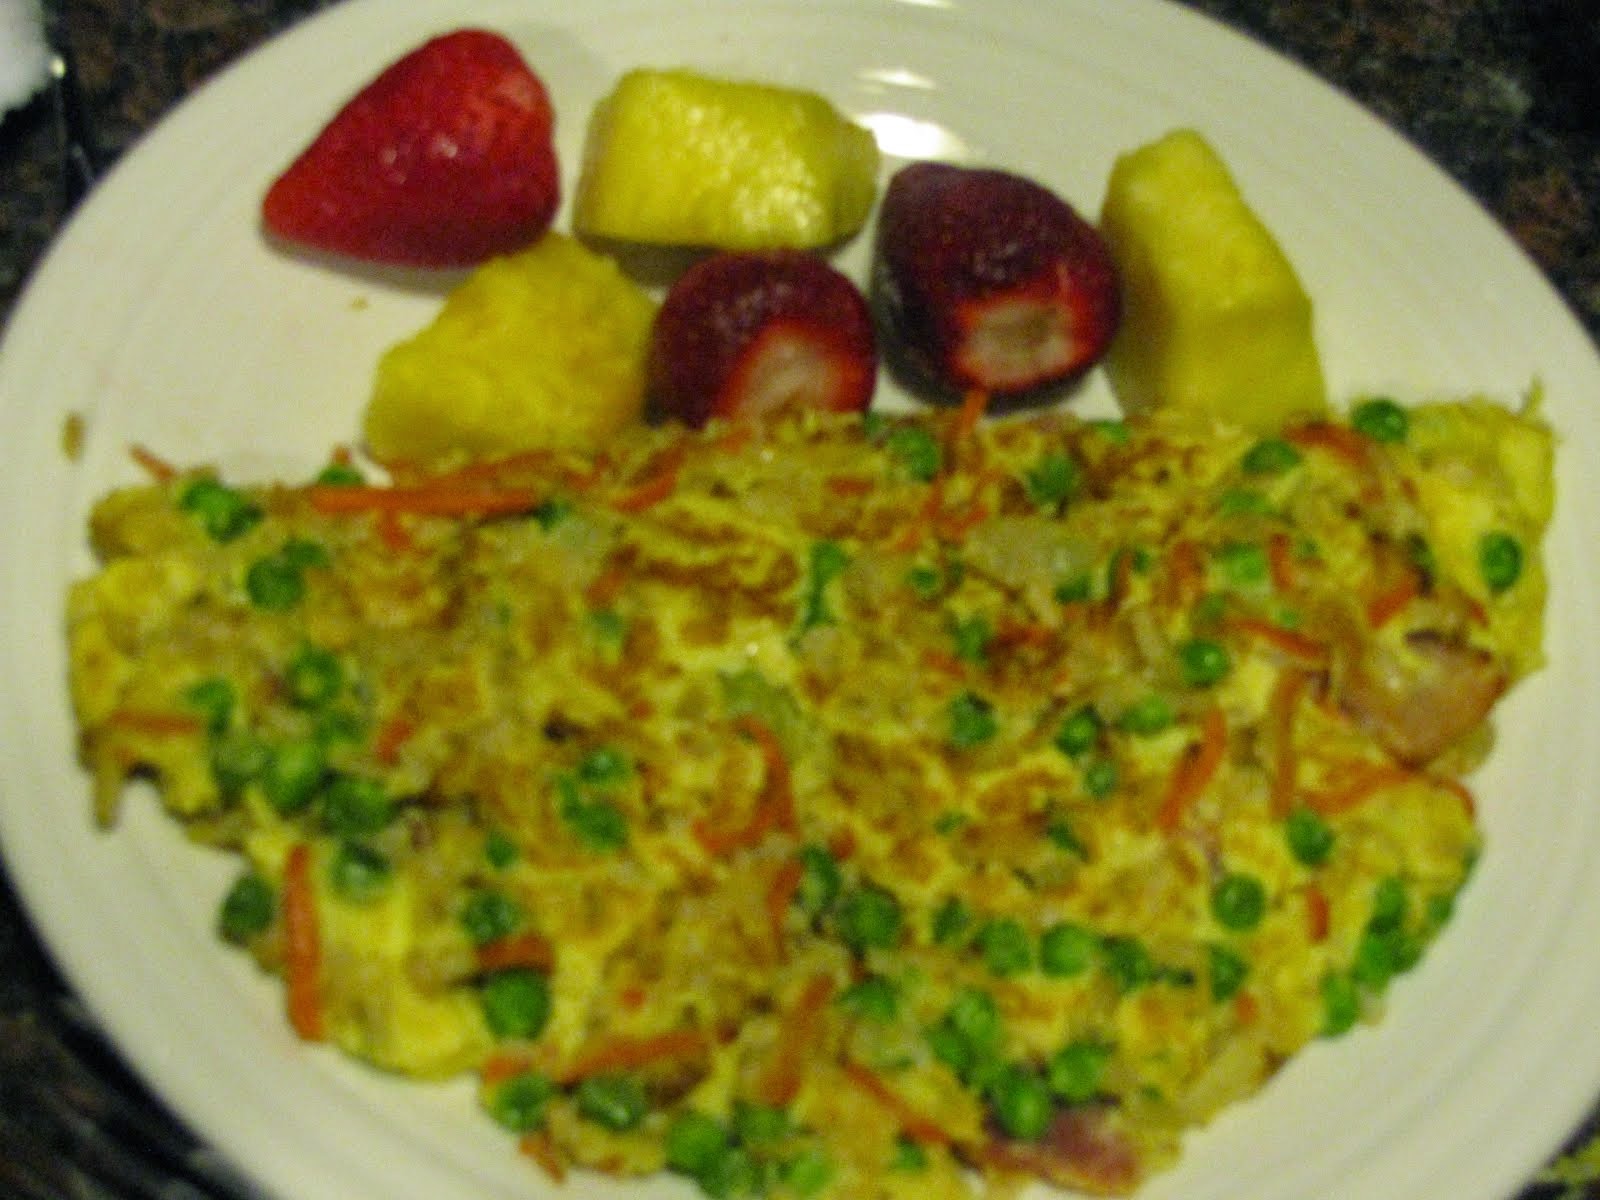 Omlet with Pineapple and Strawberries